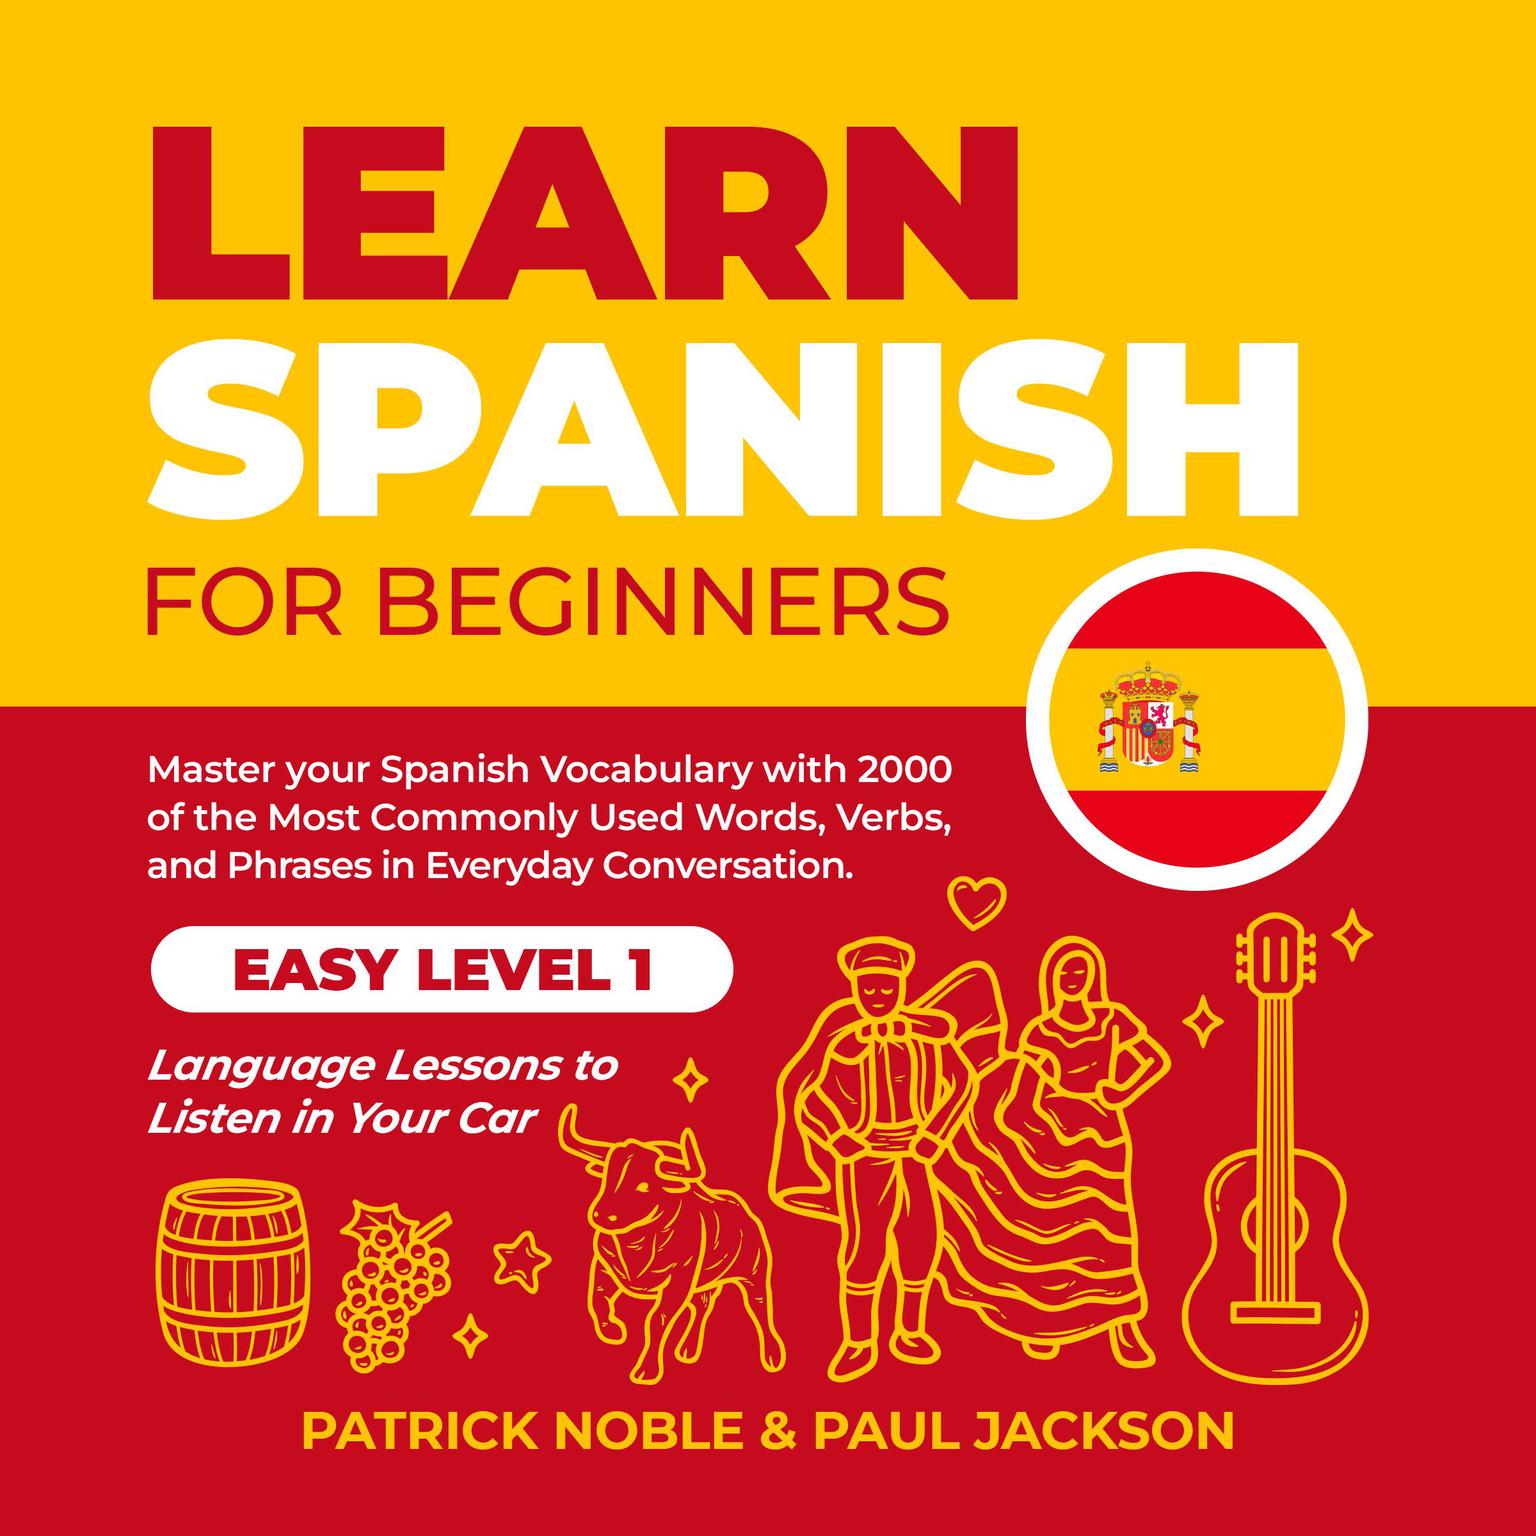 Learn Spanish for Beginners: Master your Spanish Vocabulary with 2000 of the Most Commonly used Words, Verbs and Phrases in Everyday Conversation. Easy Level 1 Language Lessons to Listen in your Car Audiobook, by Patrick Noble